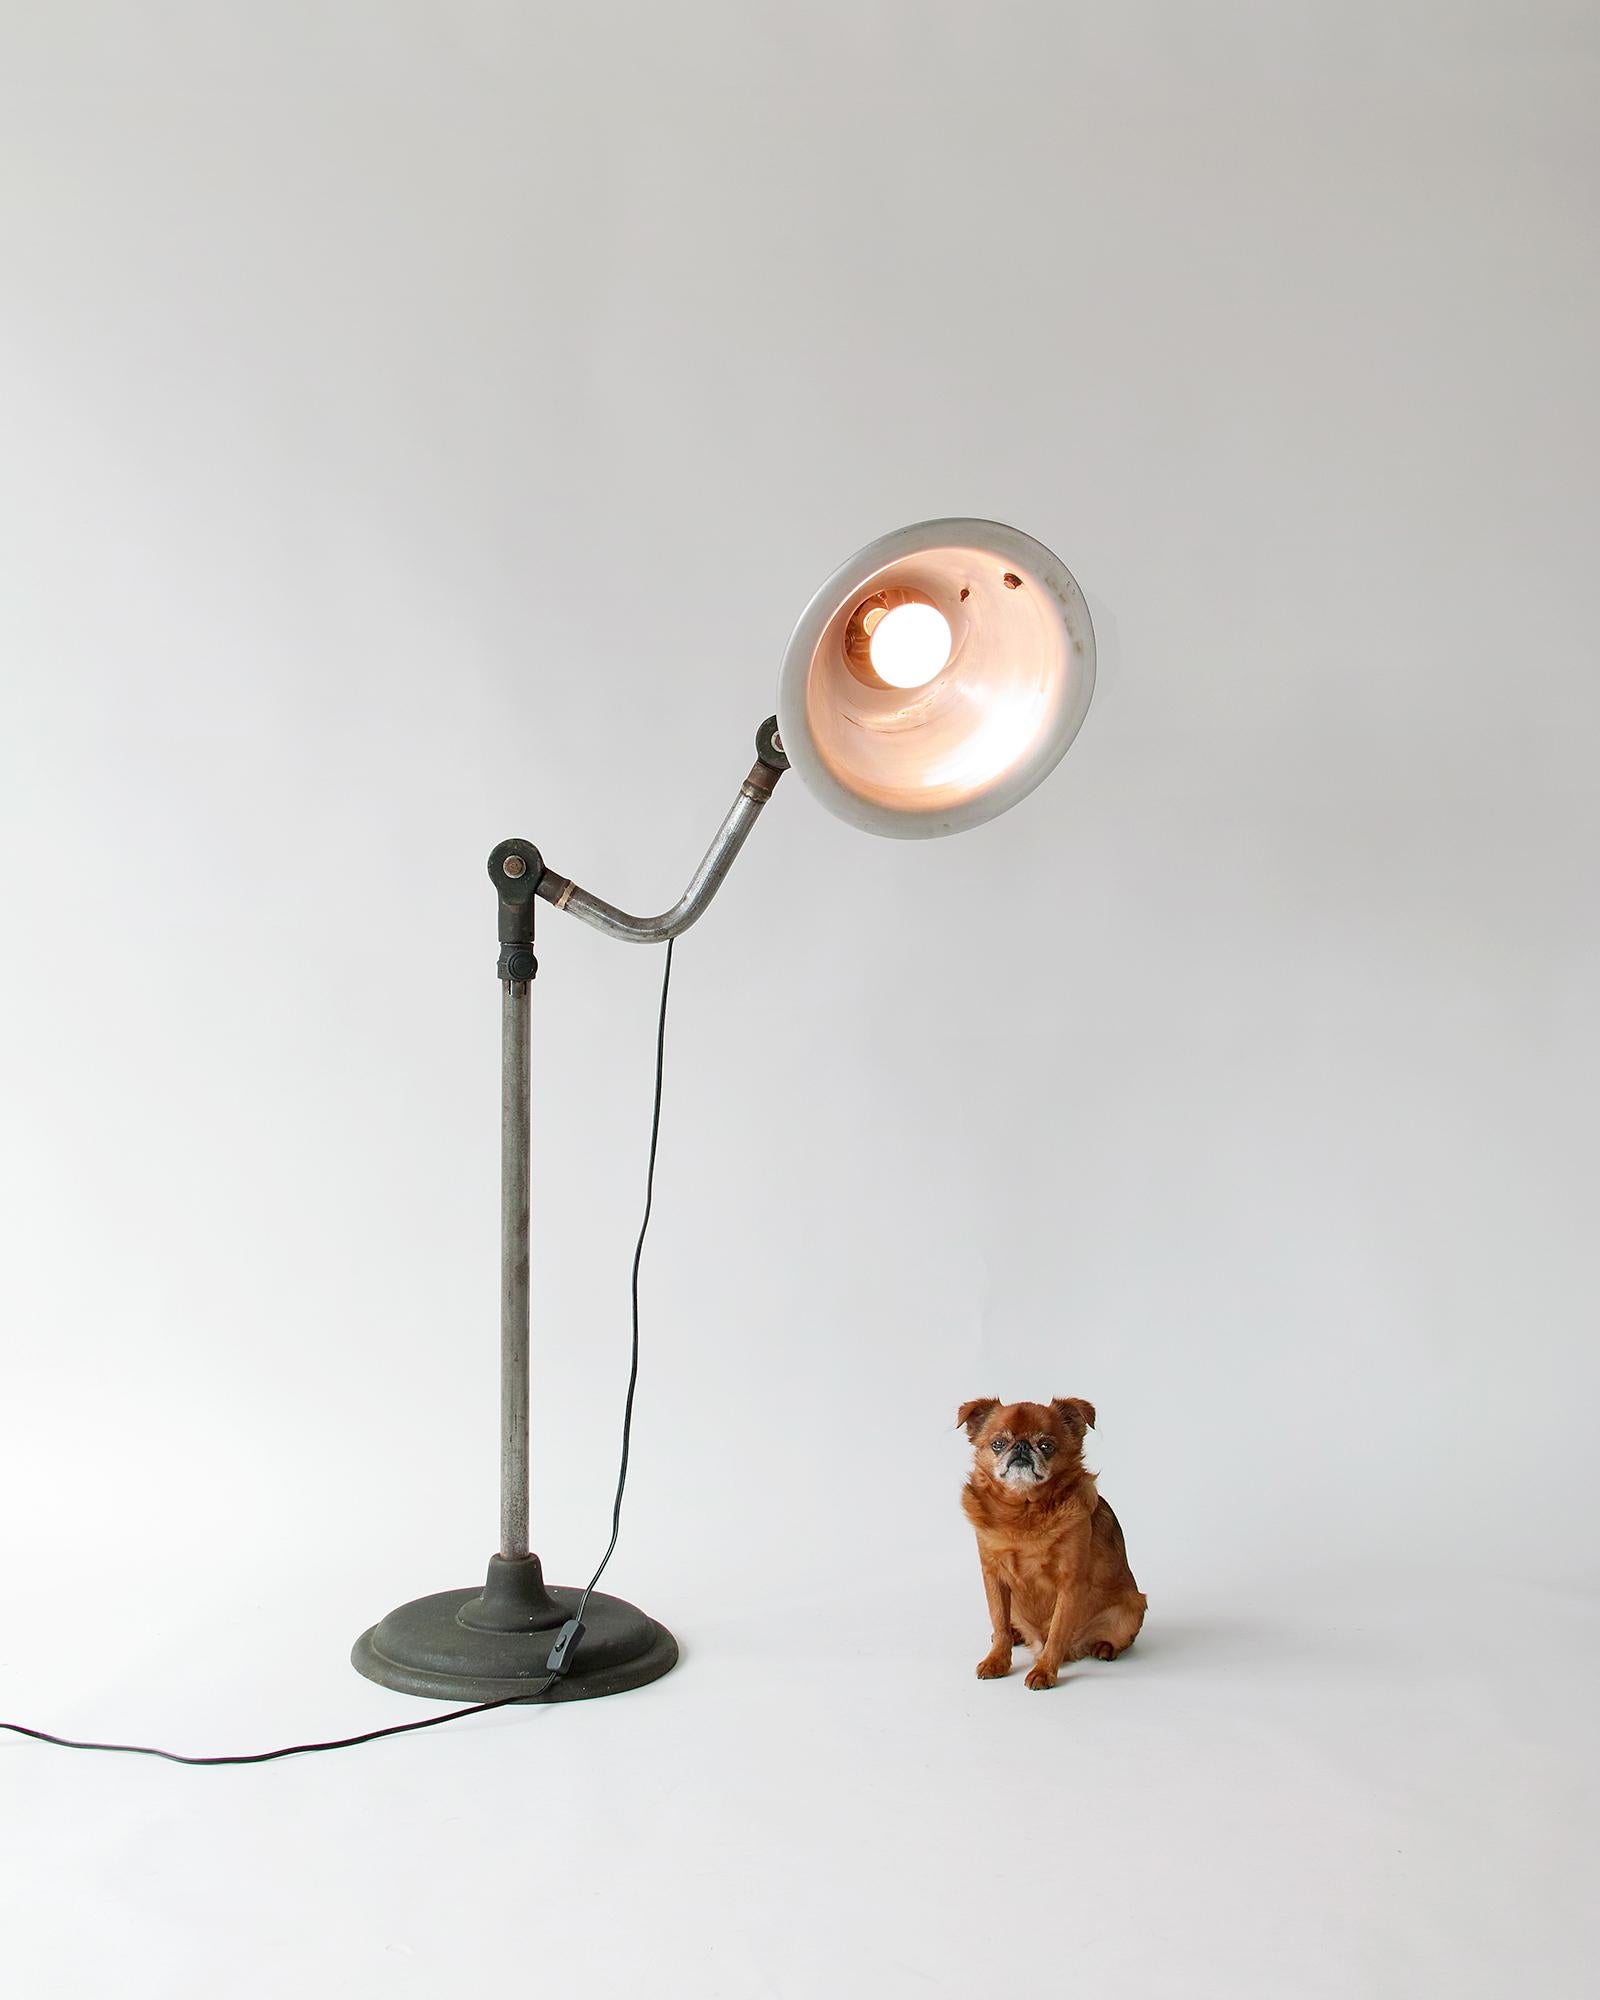 For your consideration is this mid-century industrial lamp by M. Brandt & Son featuring a telescoping steel shaft, two rotating joints, and a tilt/swivel aluminum shade. This highly functional lamp has its original surface with nice aged patina and